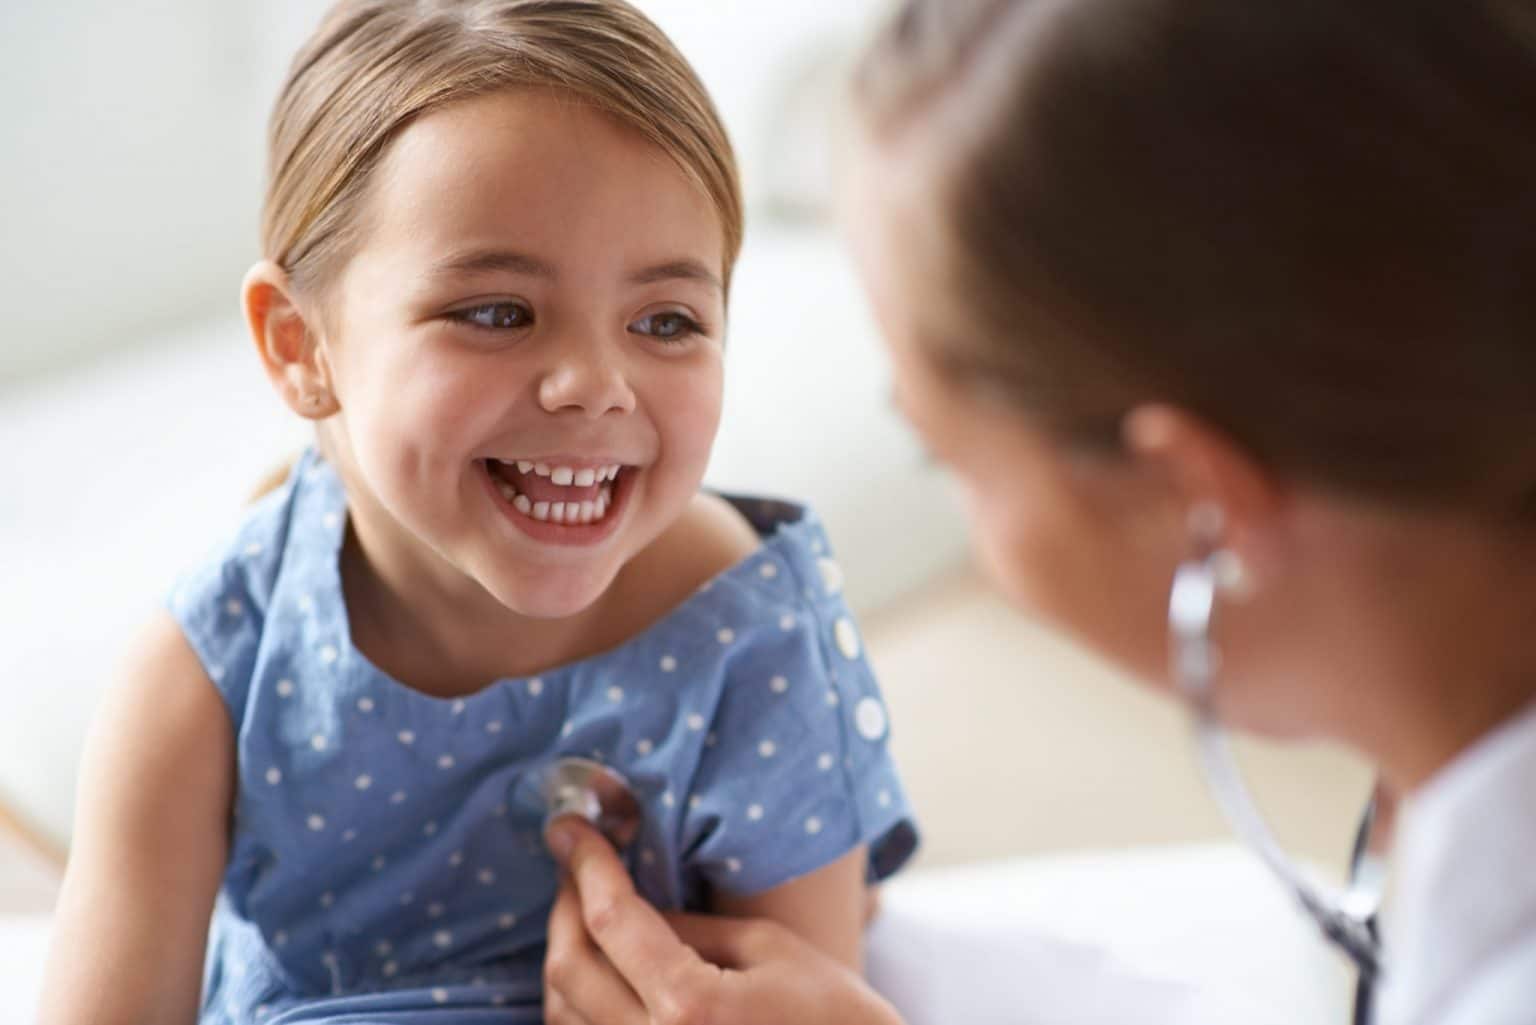 A female pediatric patient has her lungs checked by a doctor for signs of asthma.